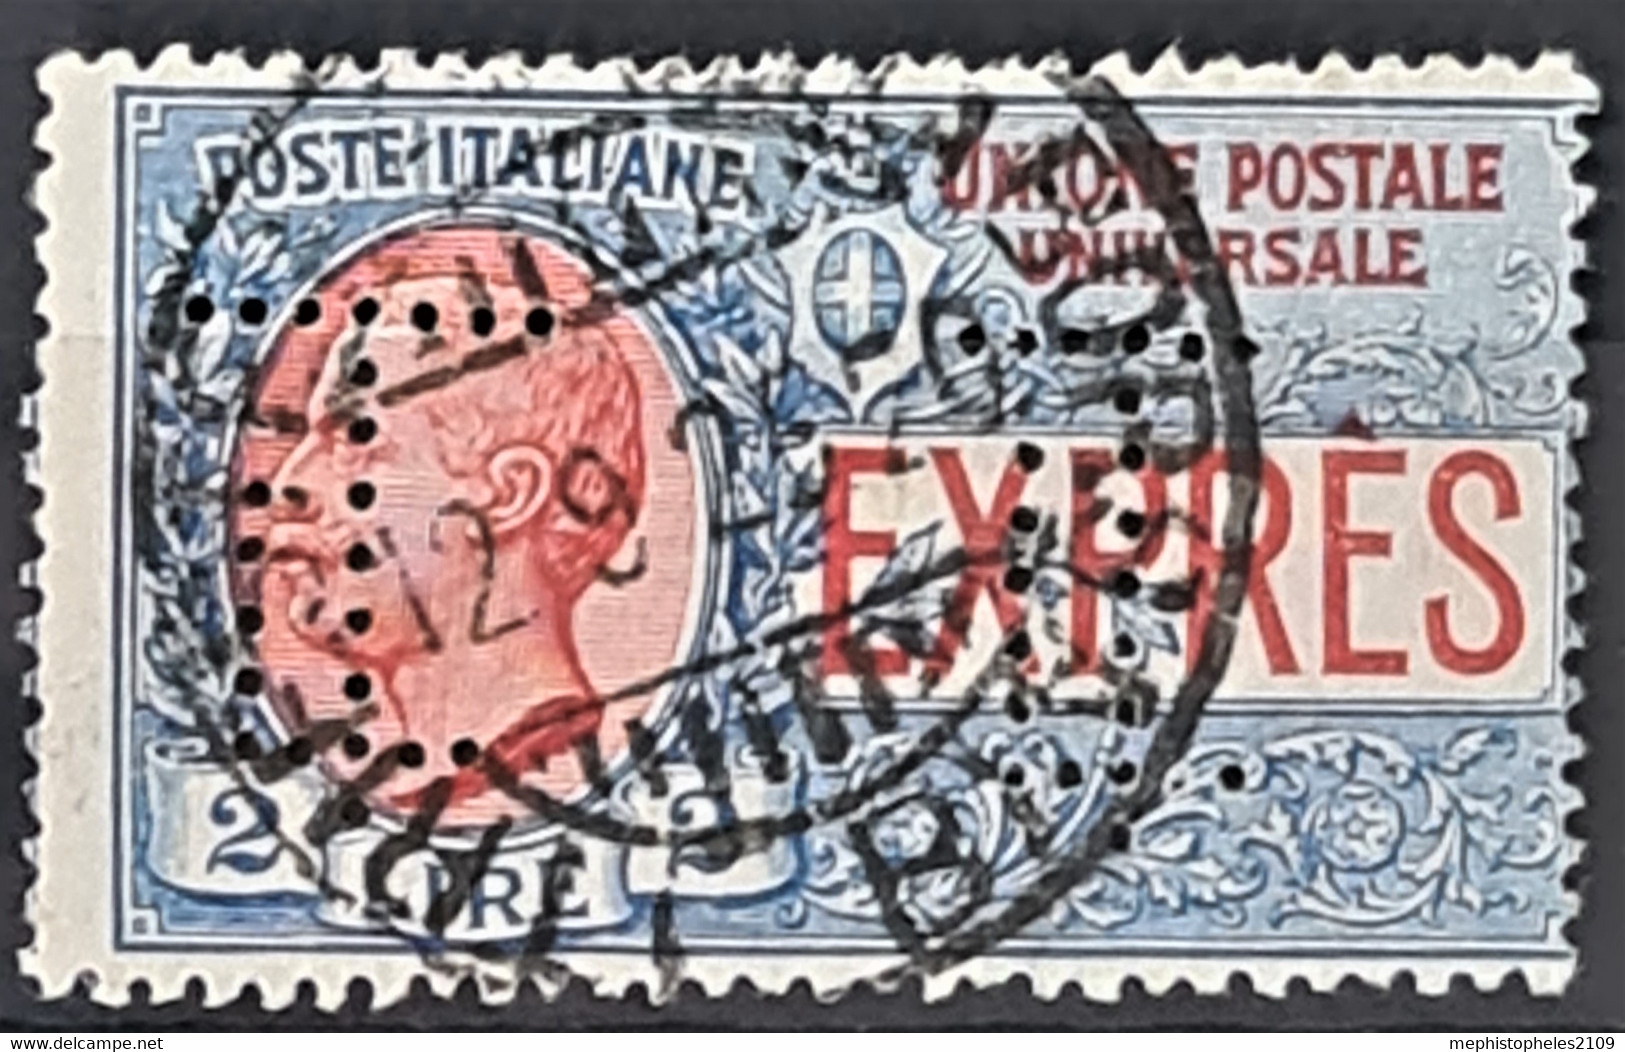 ITALY / ITALIA 1925 - Canceled - Sc# E7 - Express Mail 2L - Poste Exprèsse